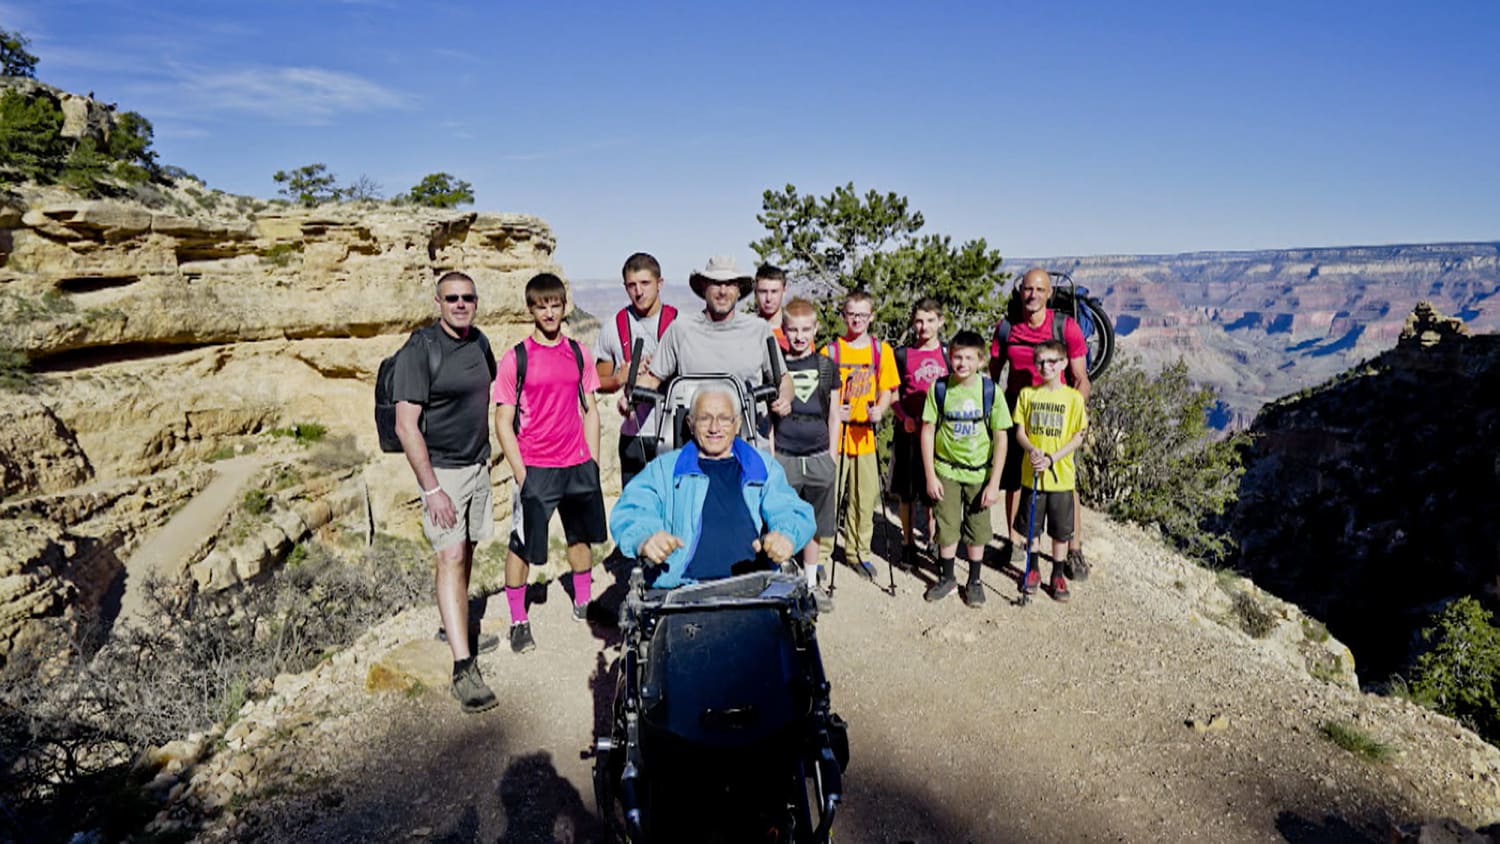 Paralyzed man hikes Grand Canyon with help of sons, grandsons - TODAY.com